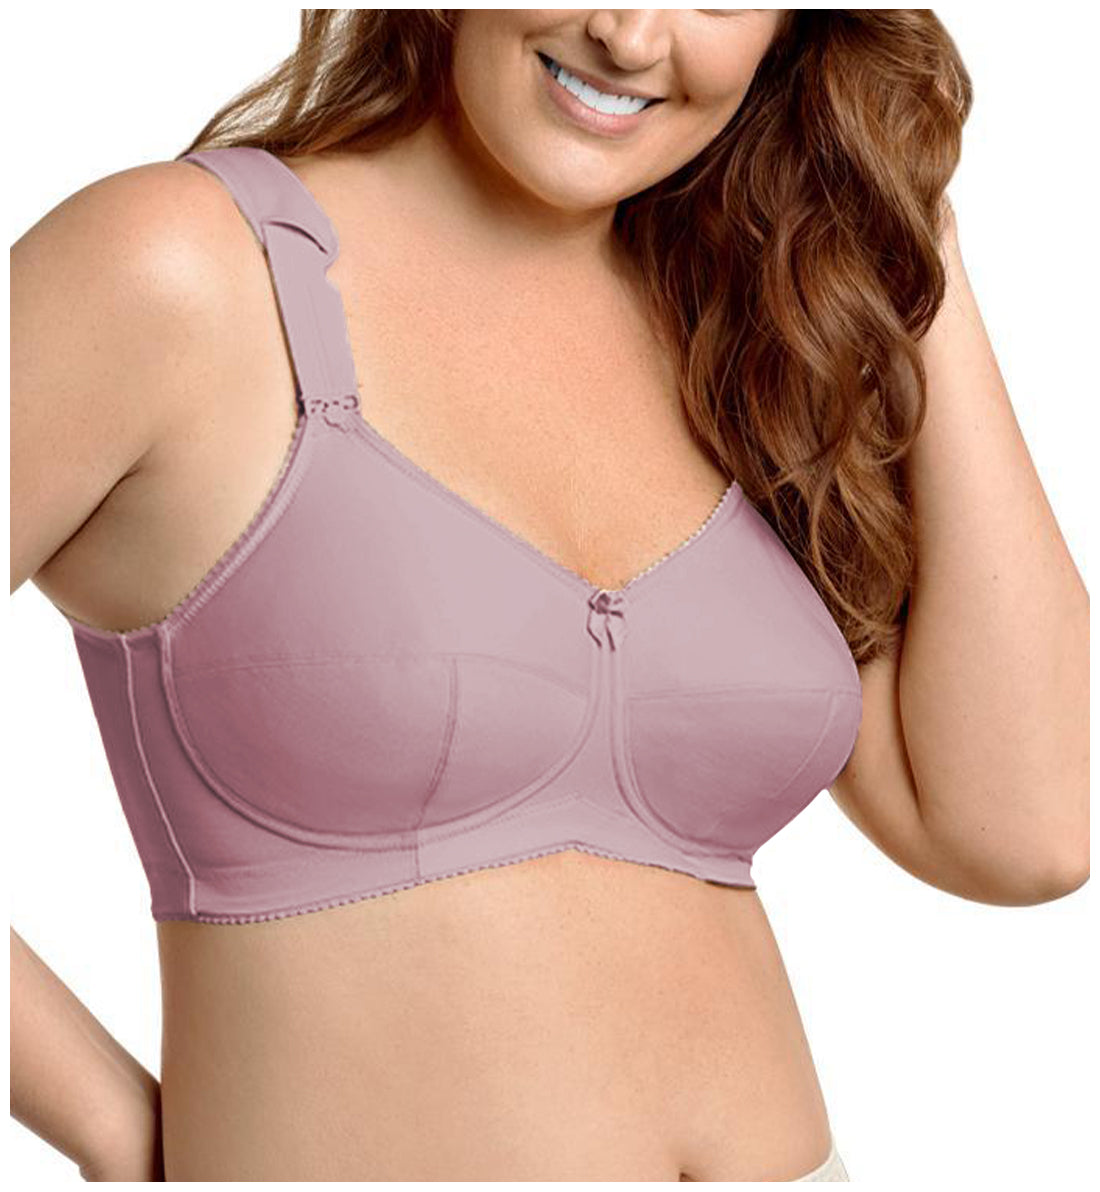 Elila Kaylee 3-Part Cup Full Support Softcup Bra (1505)- Black